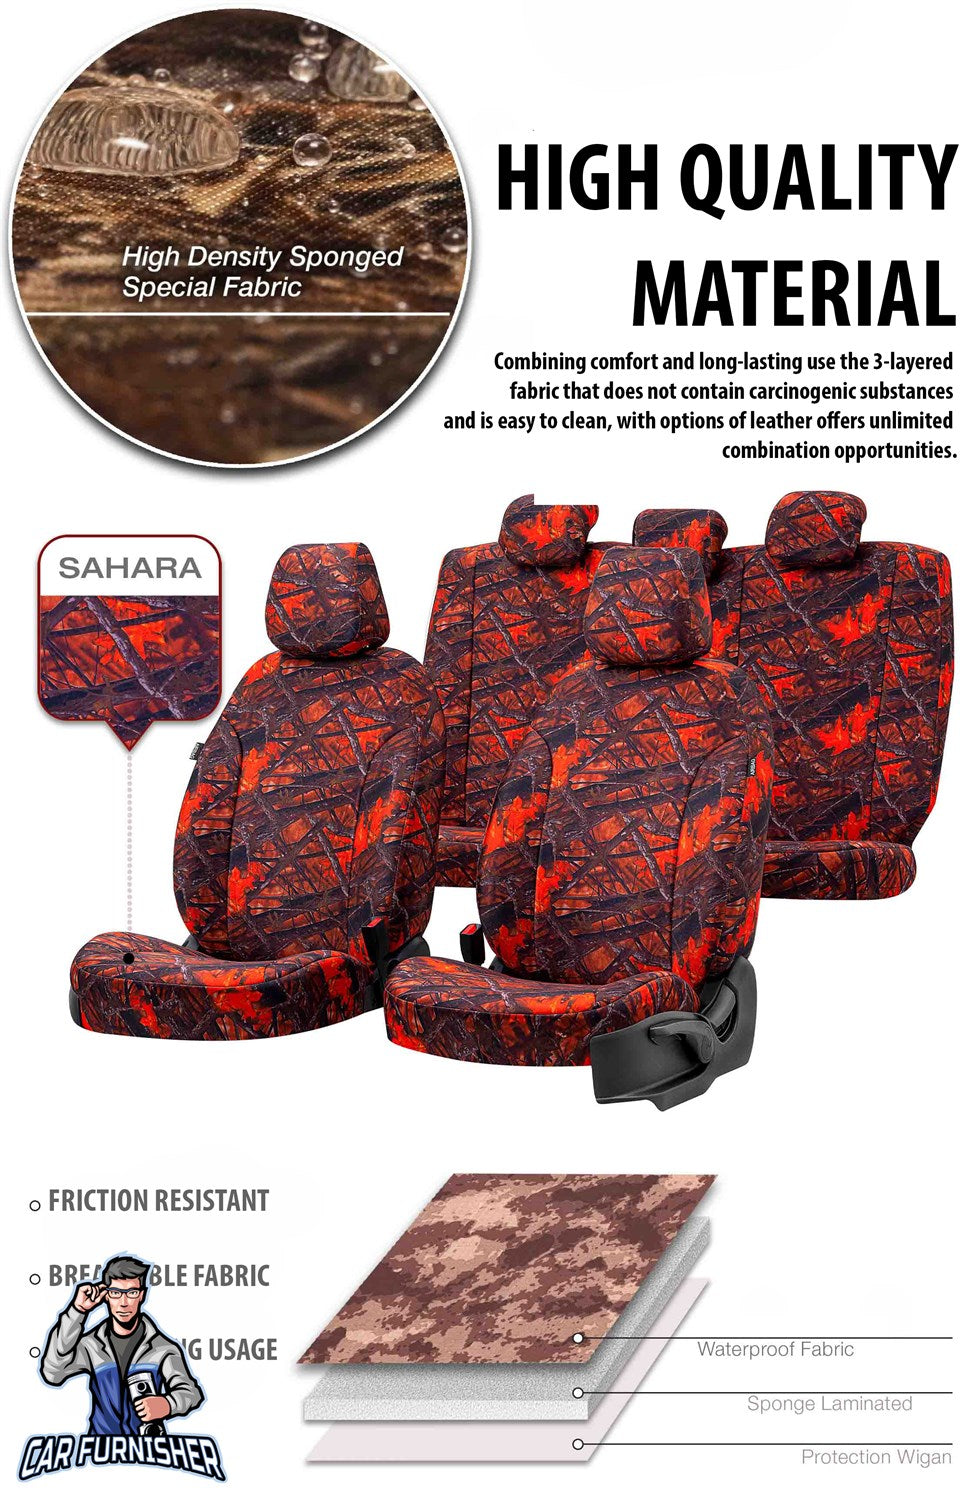 Renault Tailant Car Seat Covers 2021-2023 Camouflage Design Everest Camo Full Set (5 Seats + Handrest) Fabric